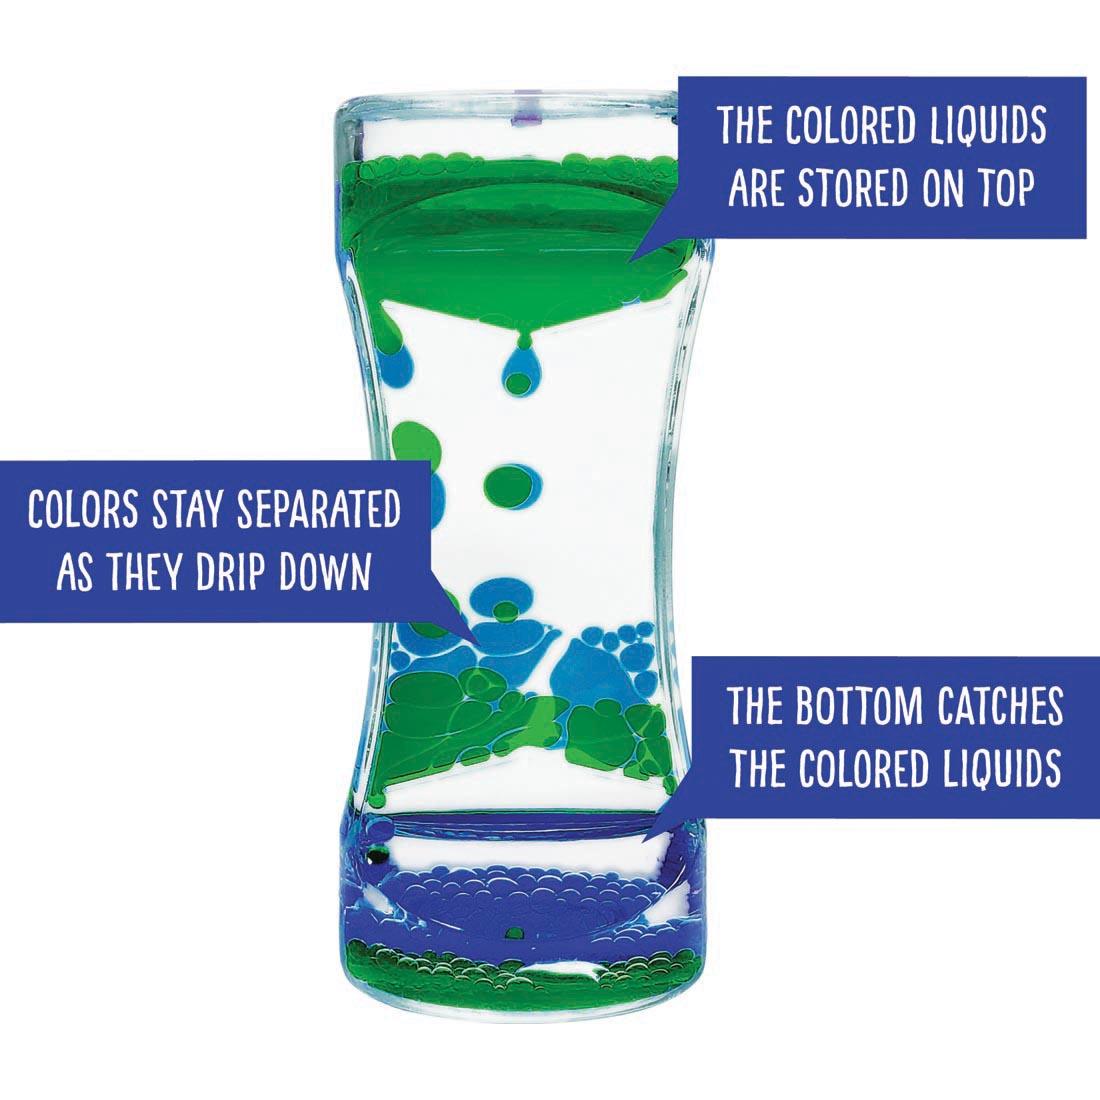 Green & Blue Liquid Motion Bubbler with the text the colored liquids are stored on top, colors stay separated as they drip down, the bottom catches the colored liquids